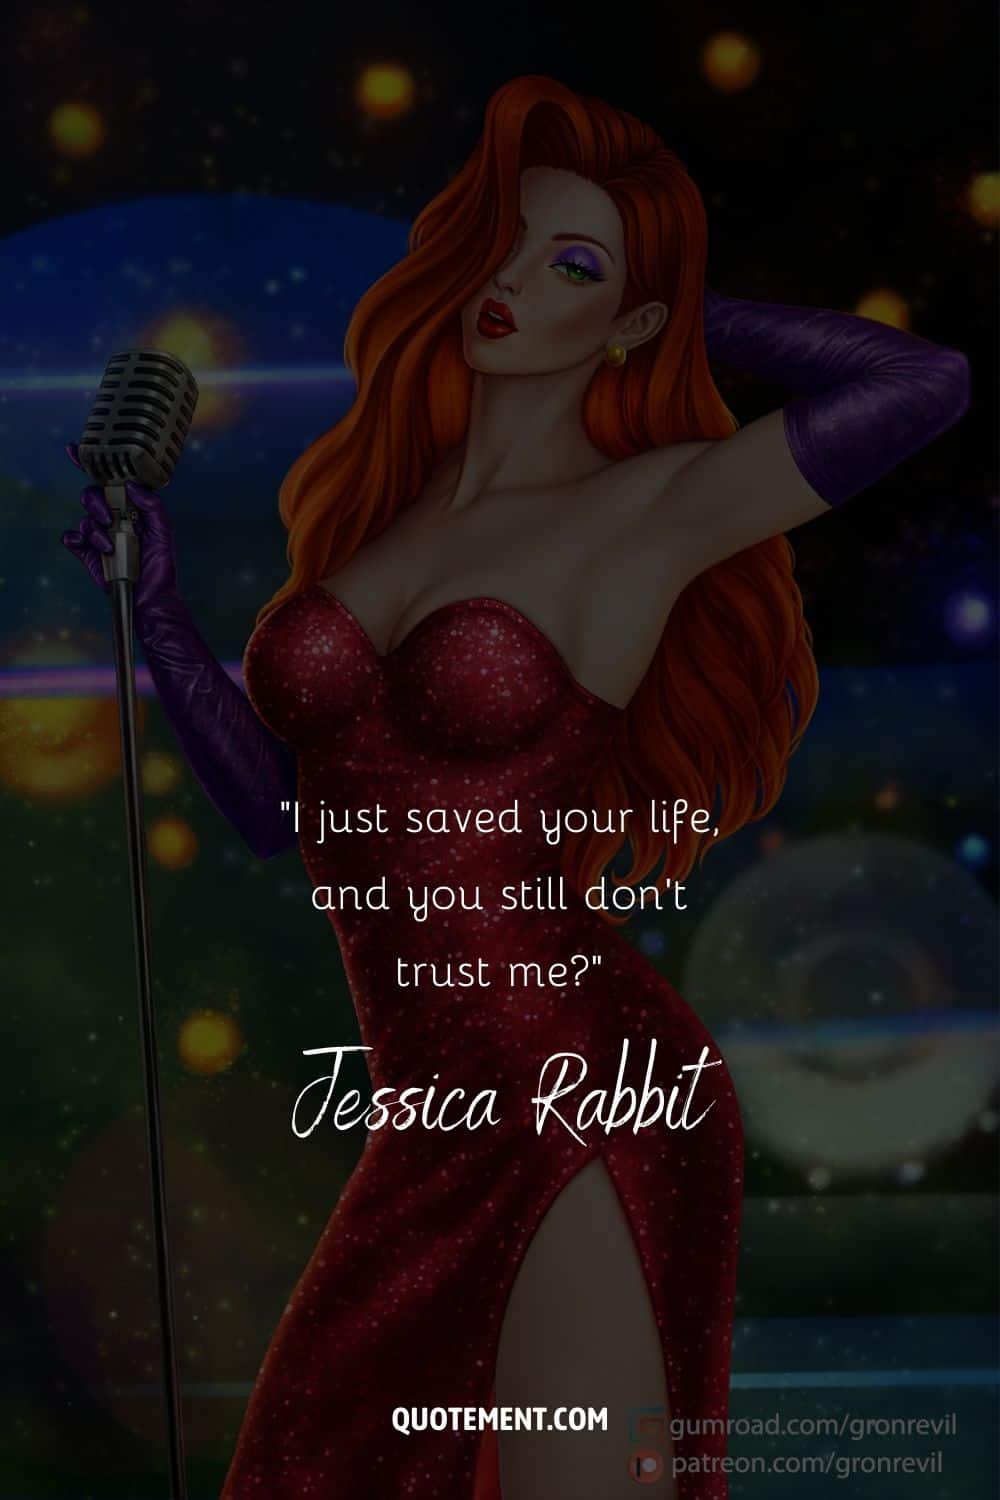 famous movie line by Jessica Rabbit represented by Jessica Rabbit illustration
